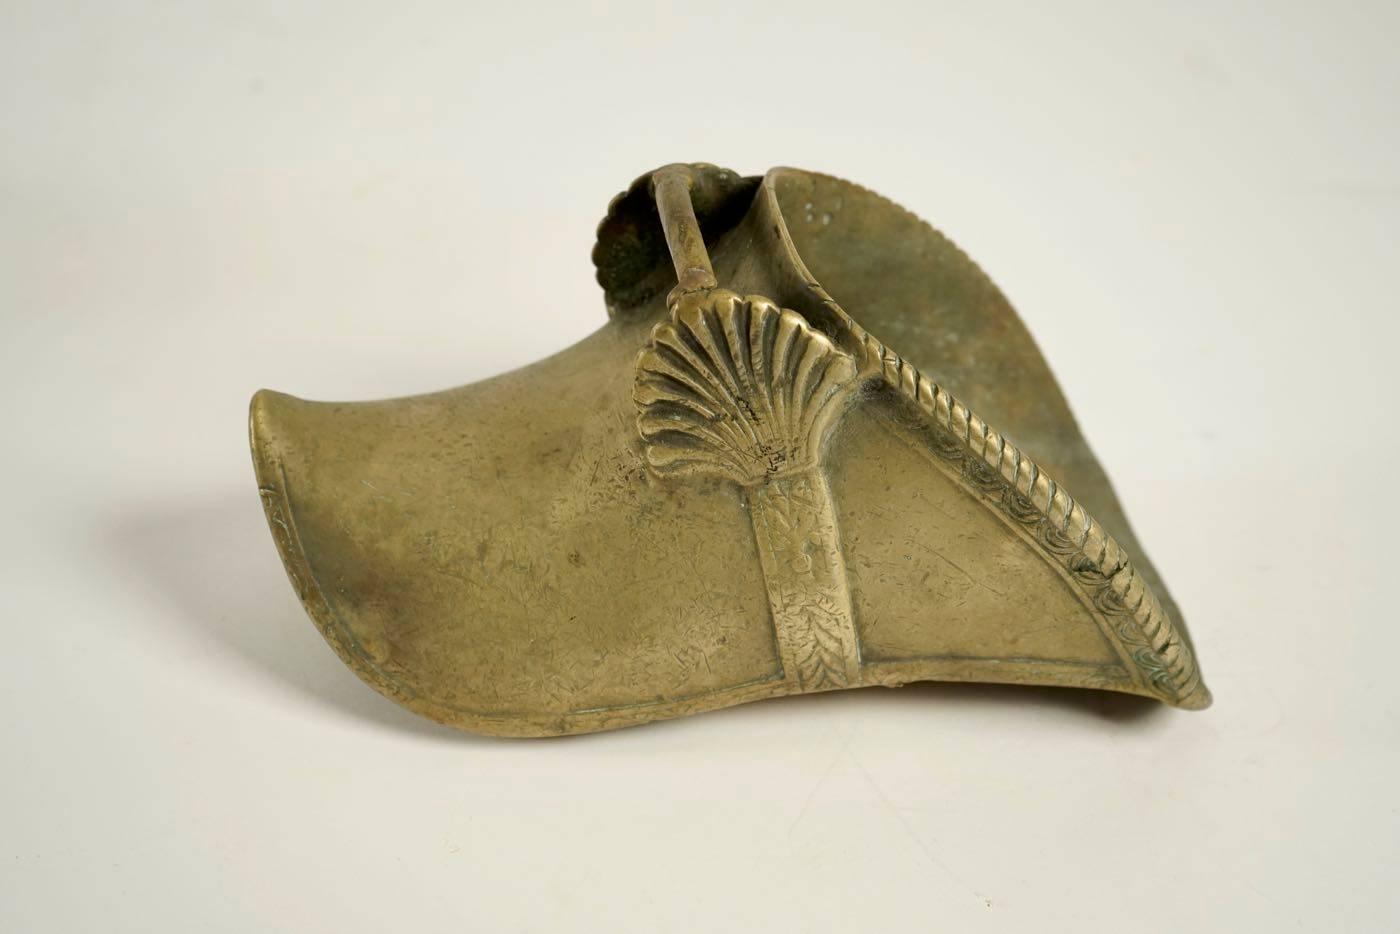 17th century shoes